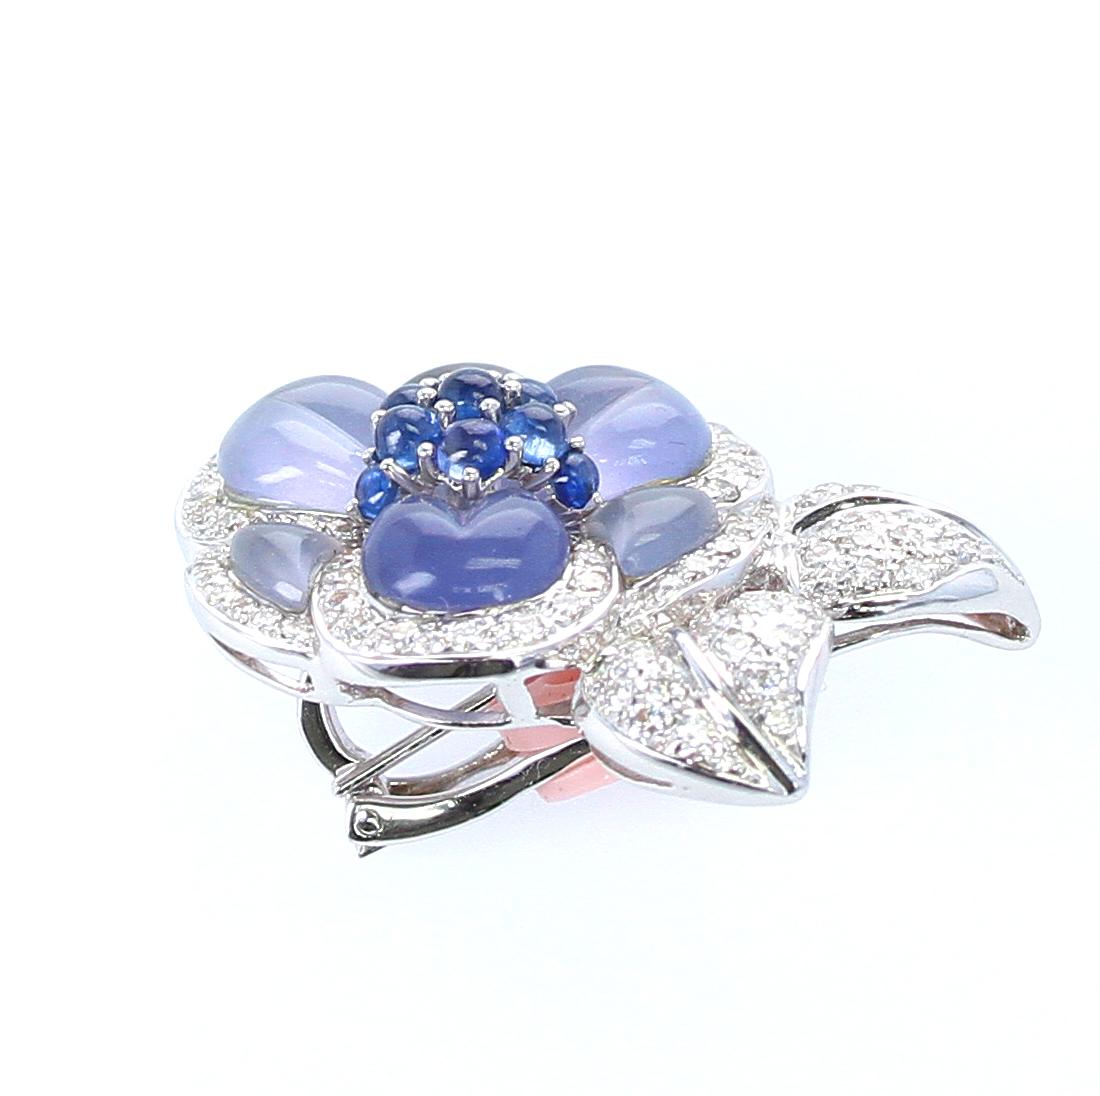 Cabochon Carved Chalcedony Floral Brooch with Diamonds and Sapphires, White Gold For Sale